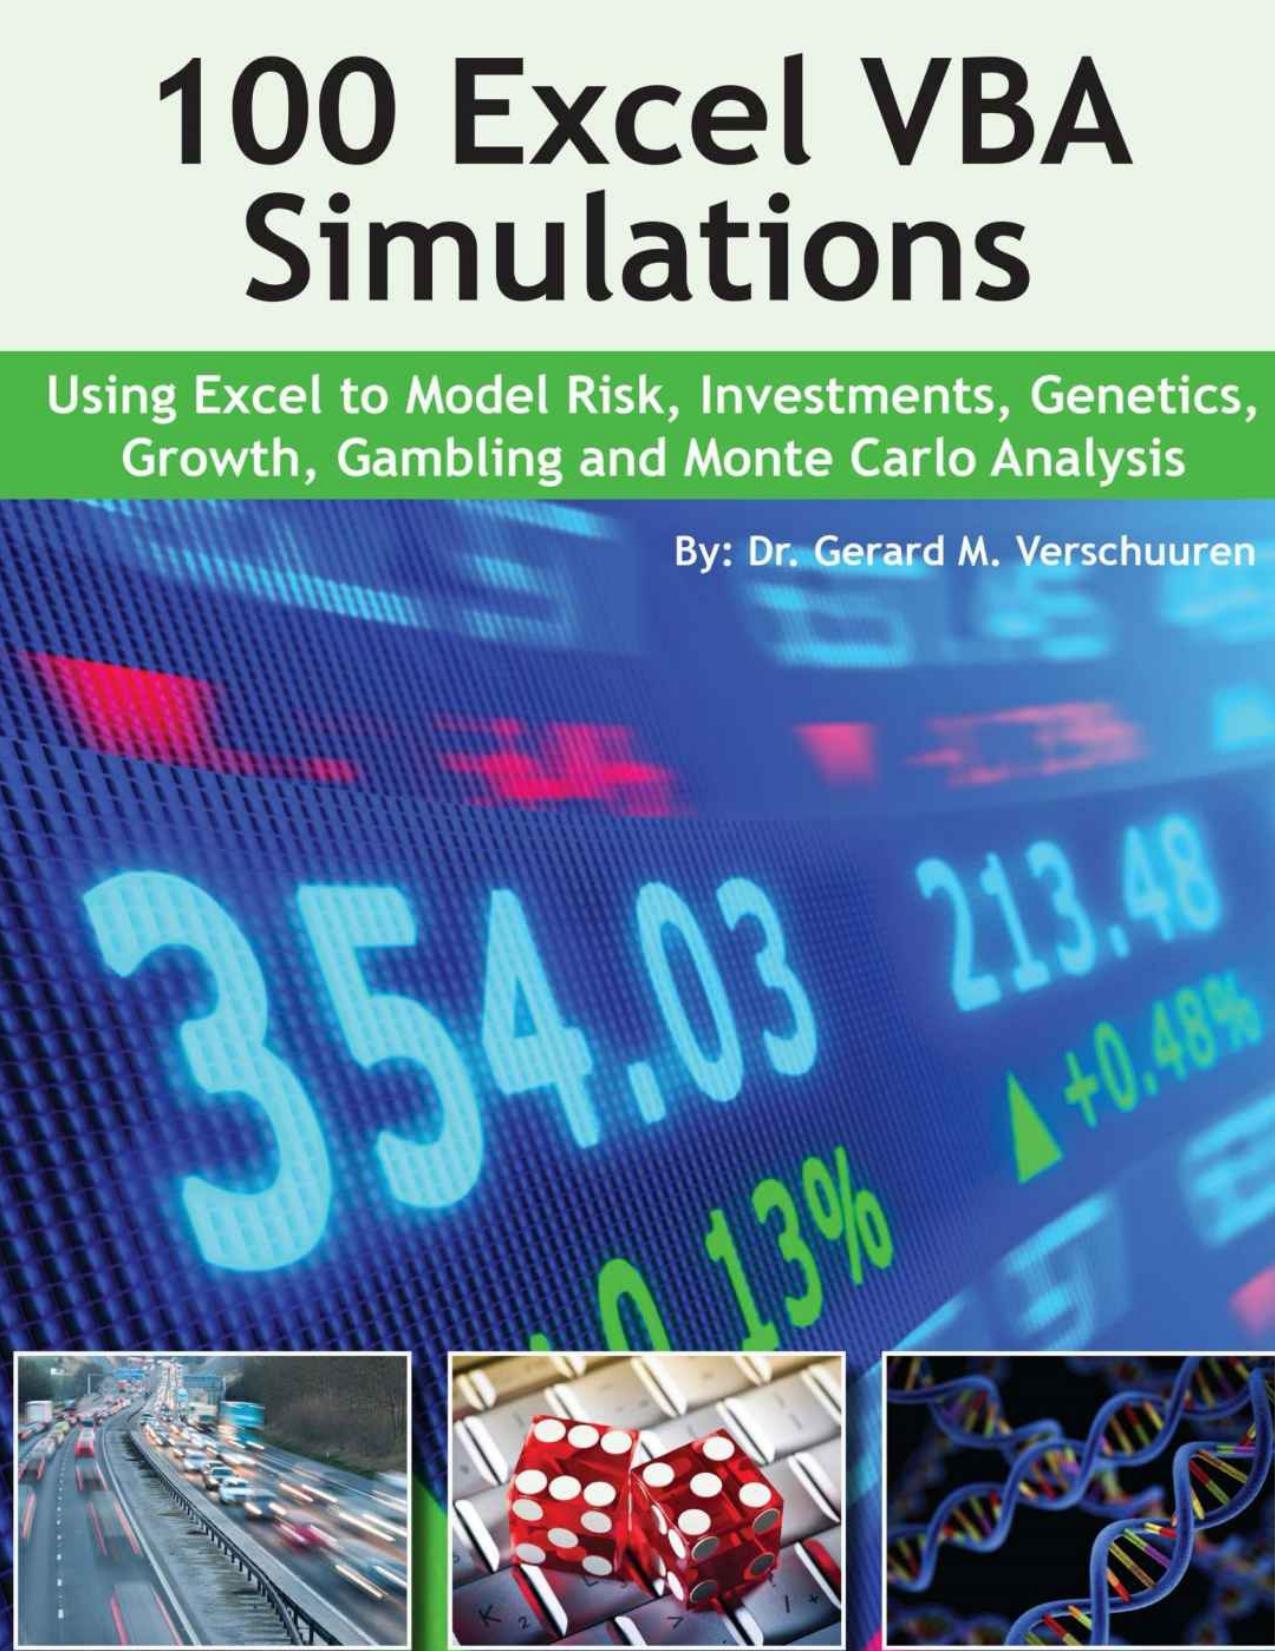 100 Excel VBA Simulations: Using Excel VBA to Model Risk, Investments, Genetics, Growth, Gambling, and Monte Carlo Analysis